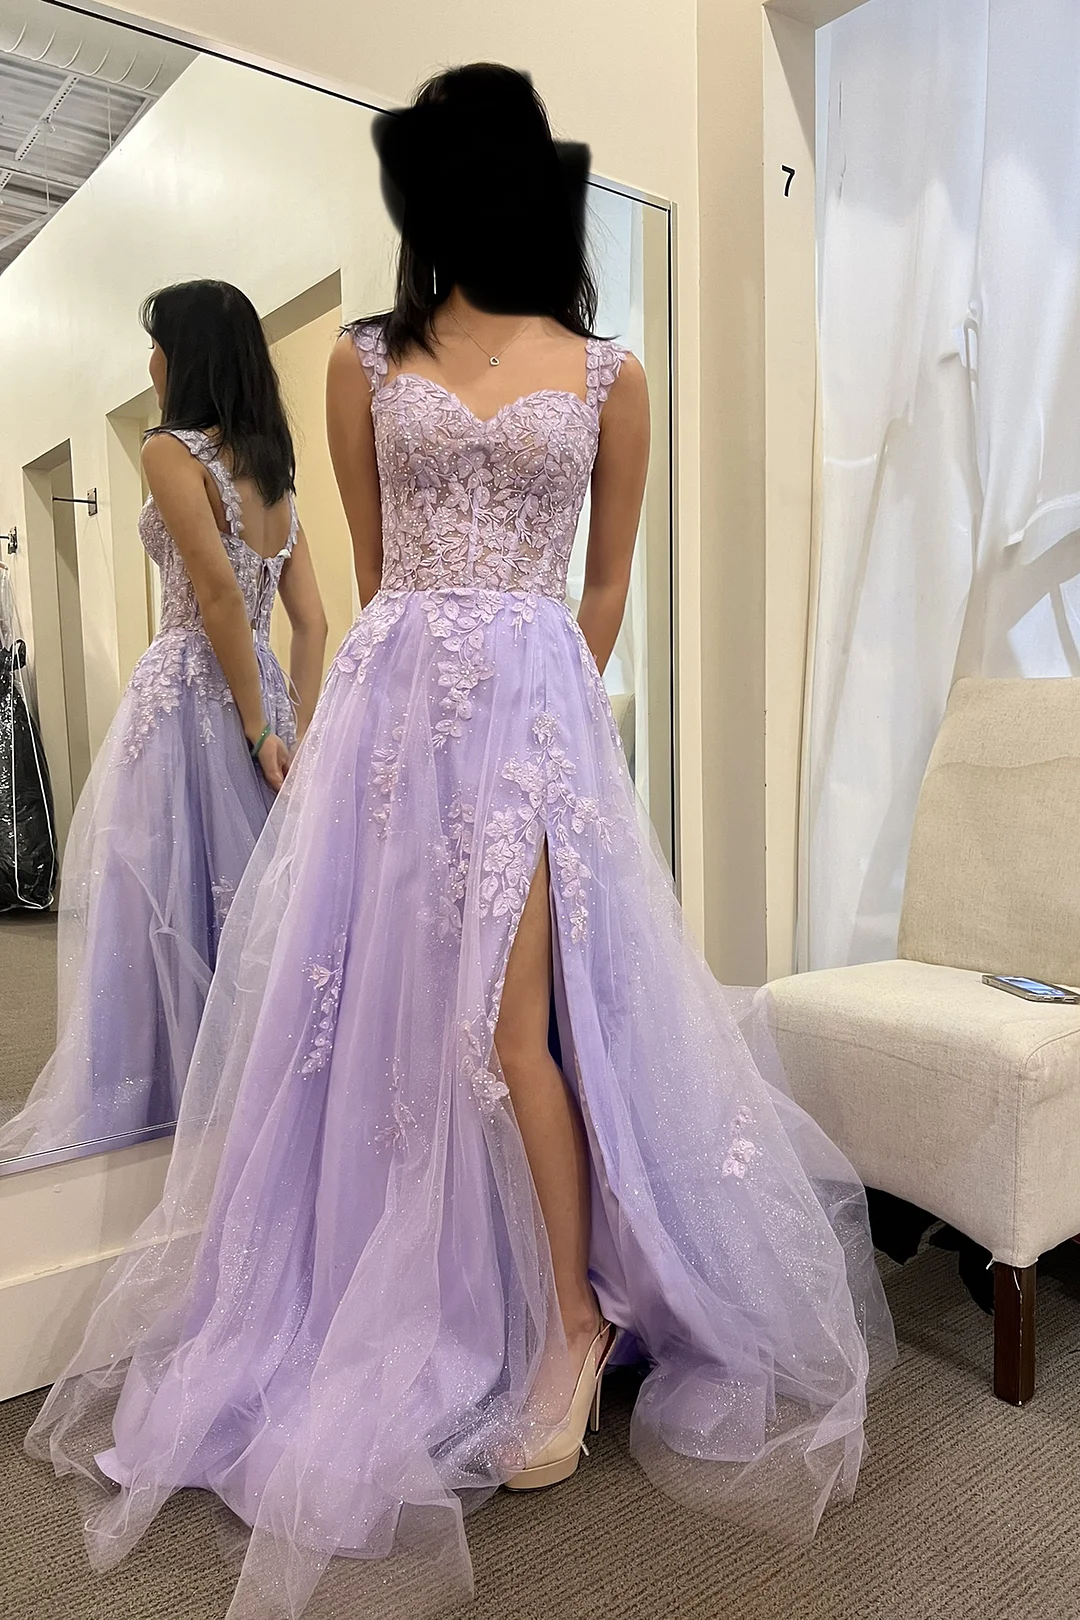 Daisda Sleeveless Sweetheart Front Split Mermaid Evening Dress Lavender With Lace Appliques